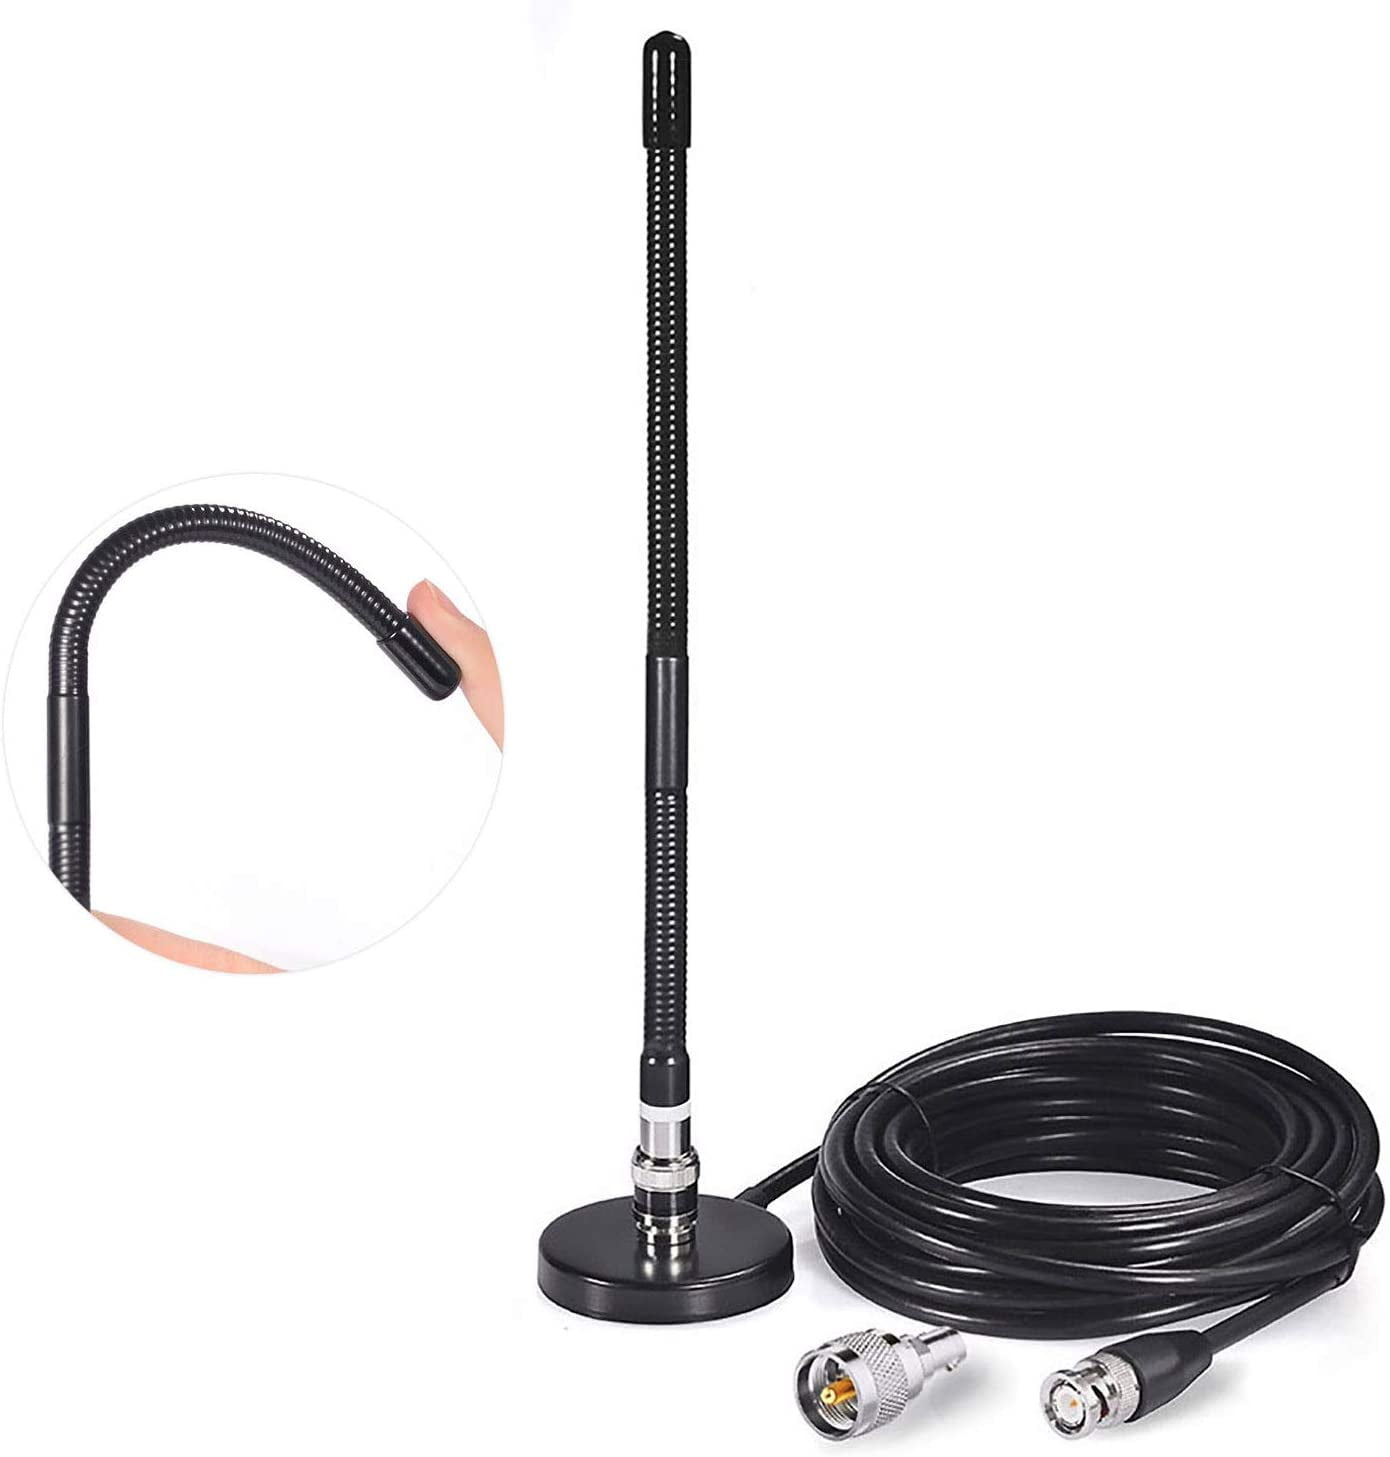 Eightwood CB Antenna with Magnetic Base for Portable Handheld CB Radio ...